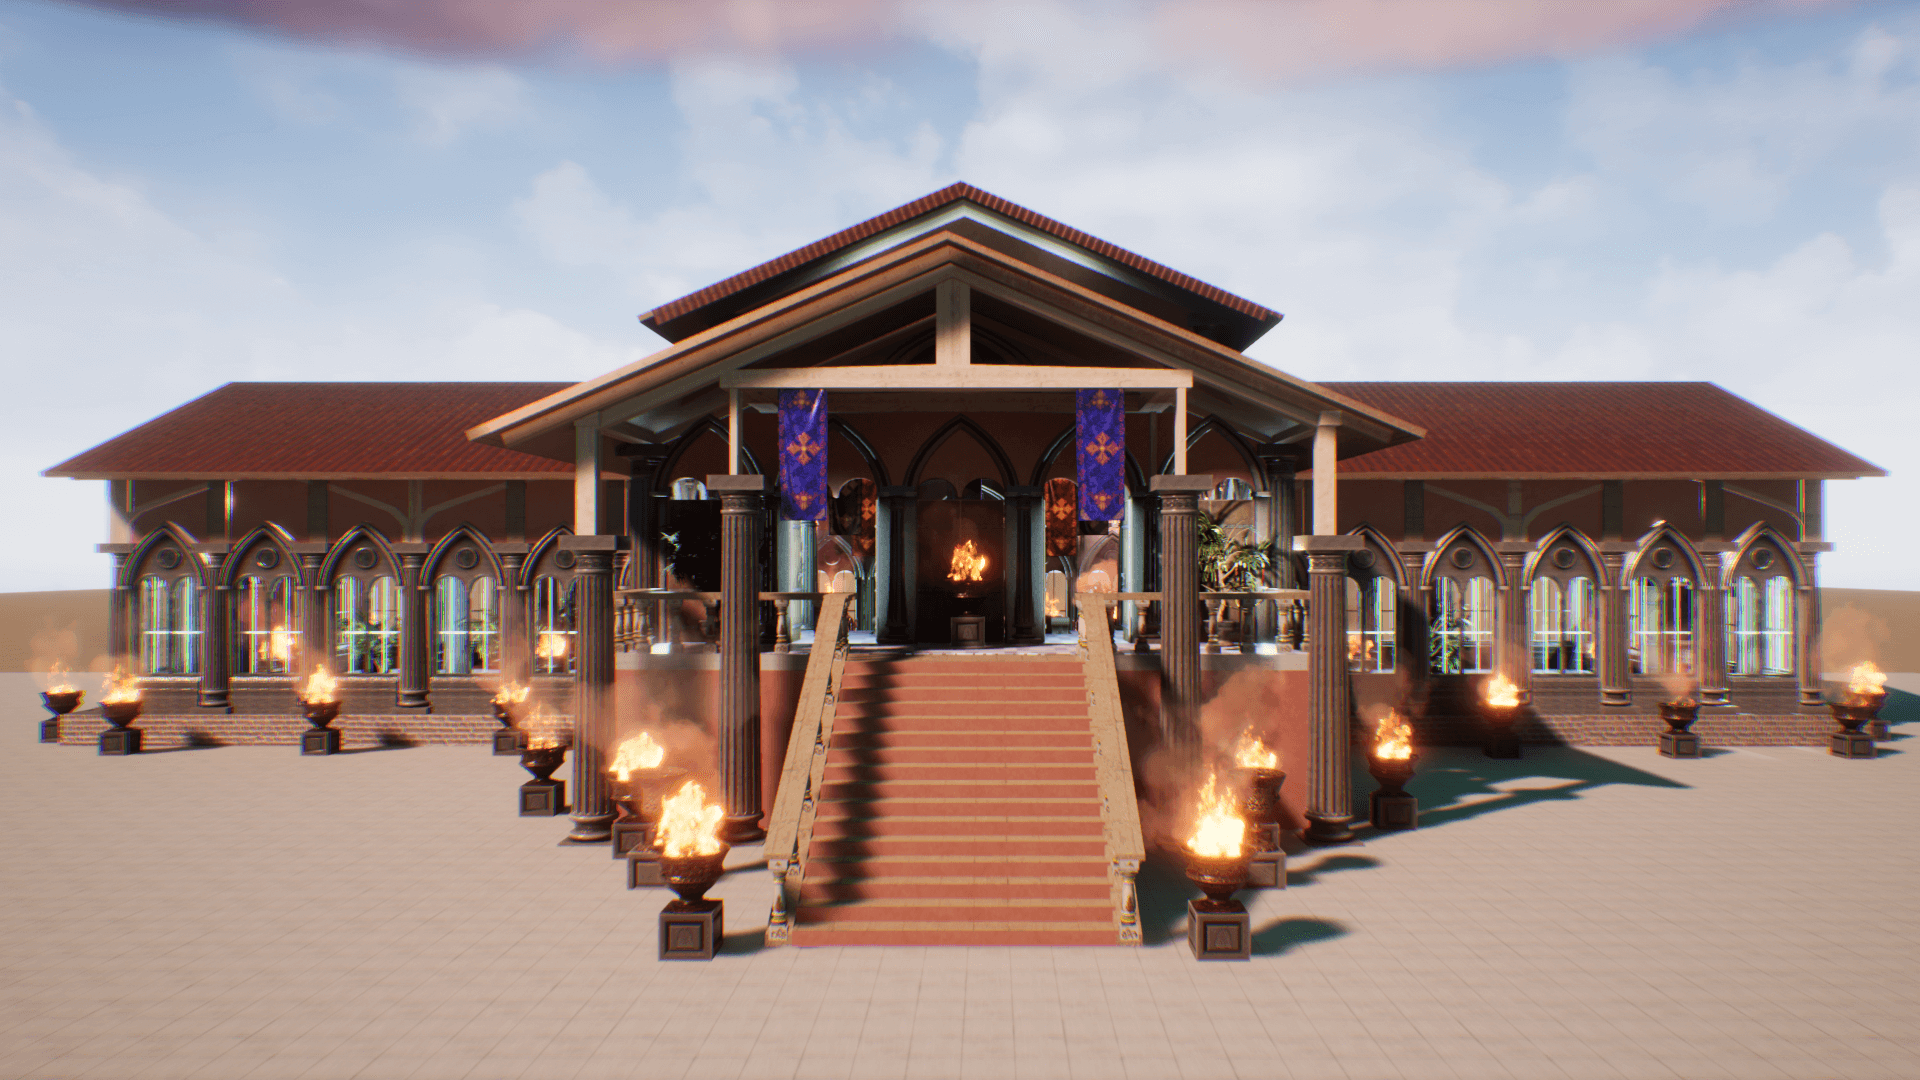 An image showing the updated asset pack Royal Palace 2